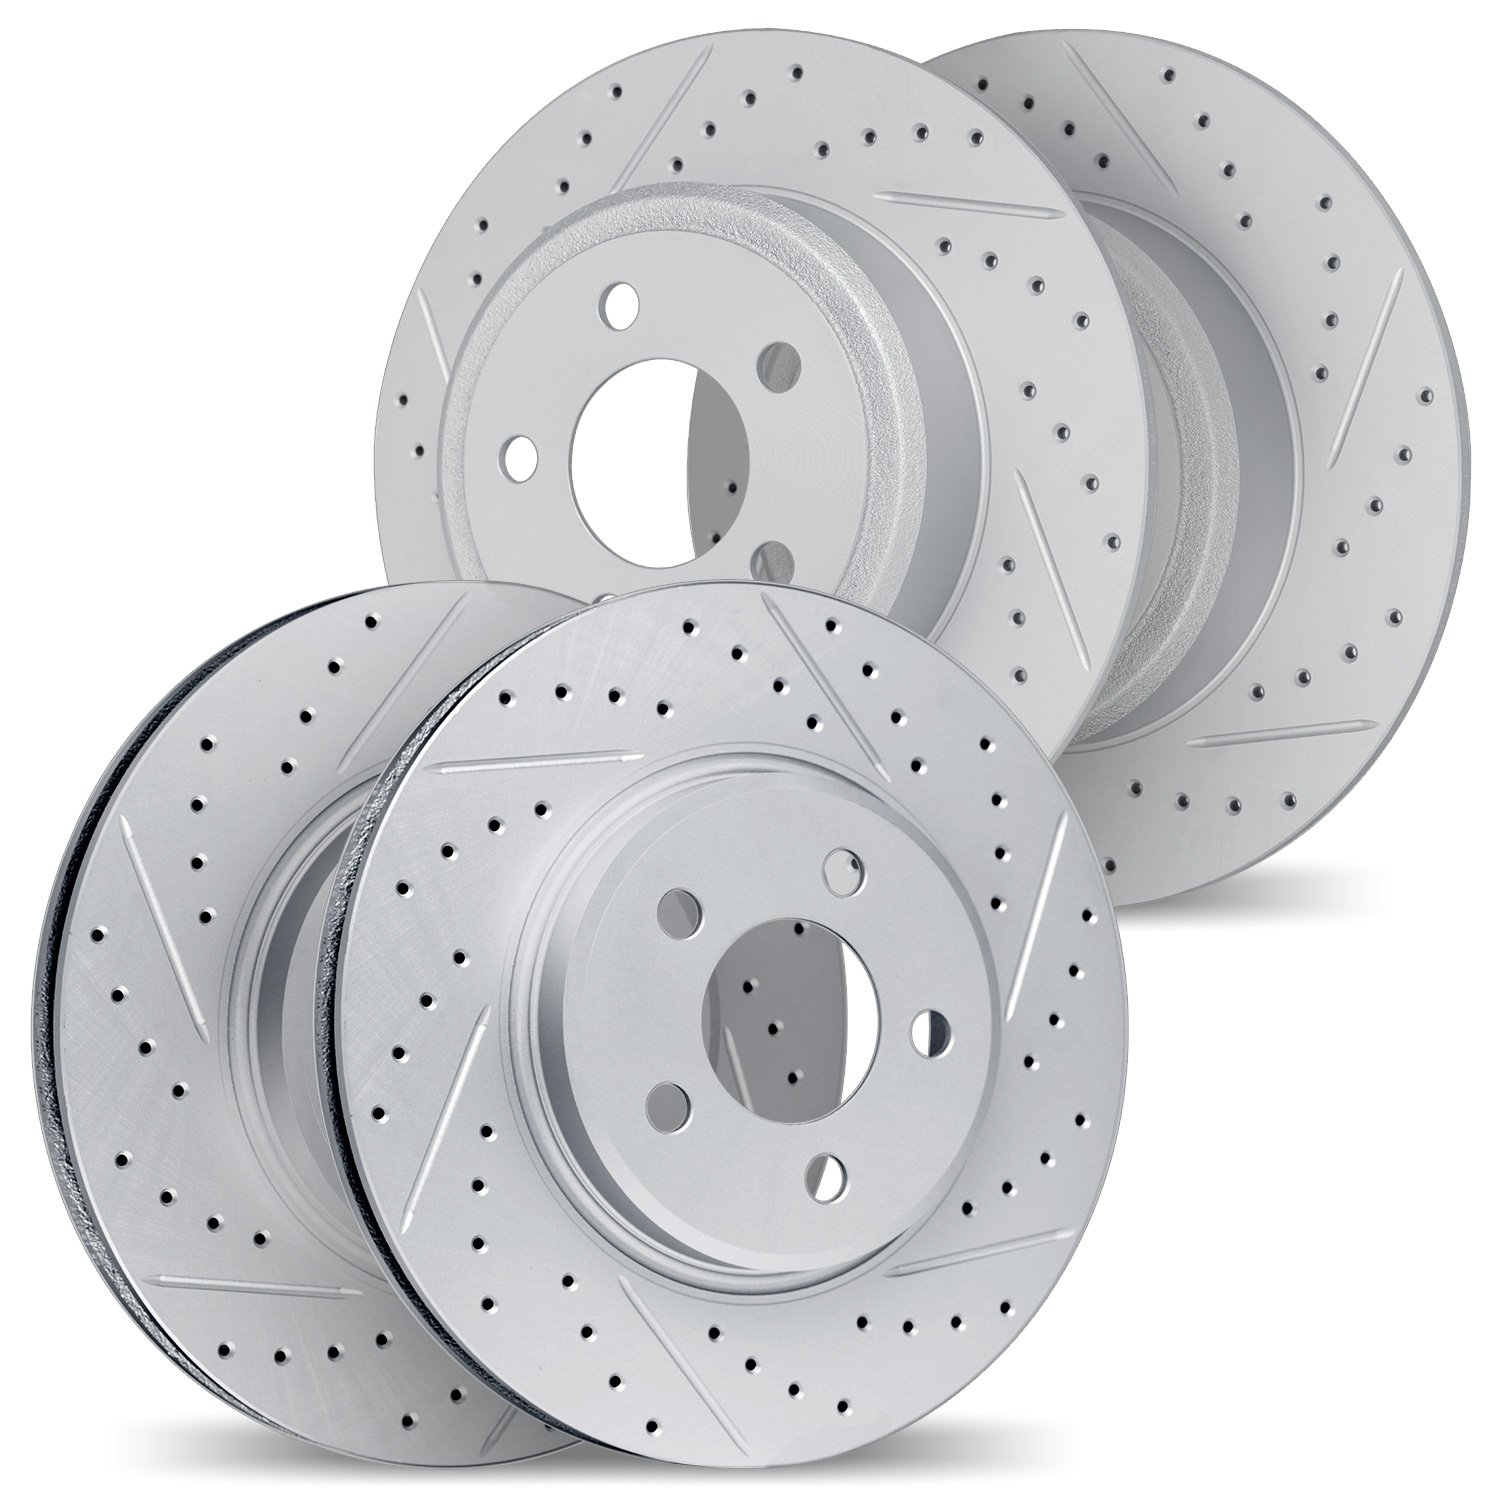 2004-72031 Geoperformance Drilled/Slotted Brake Rotors, 2005-2006 Mitsubishi, Position: Front and Rear